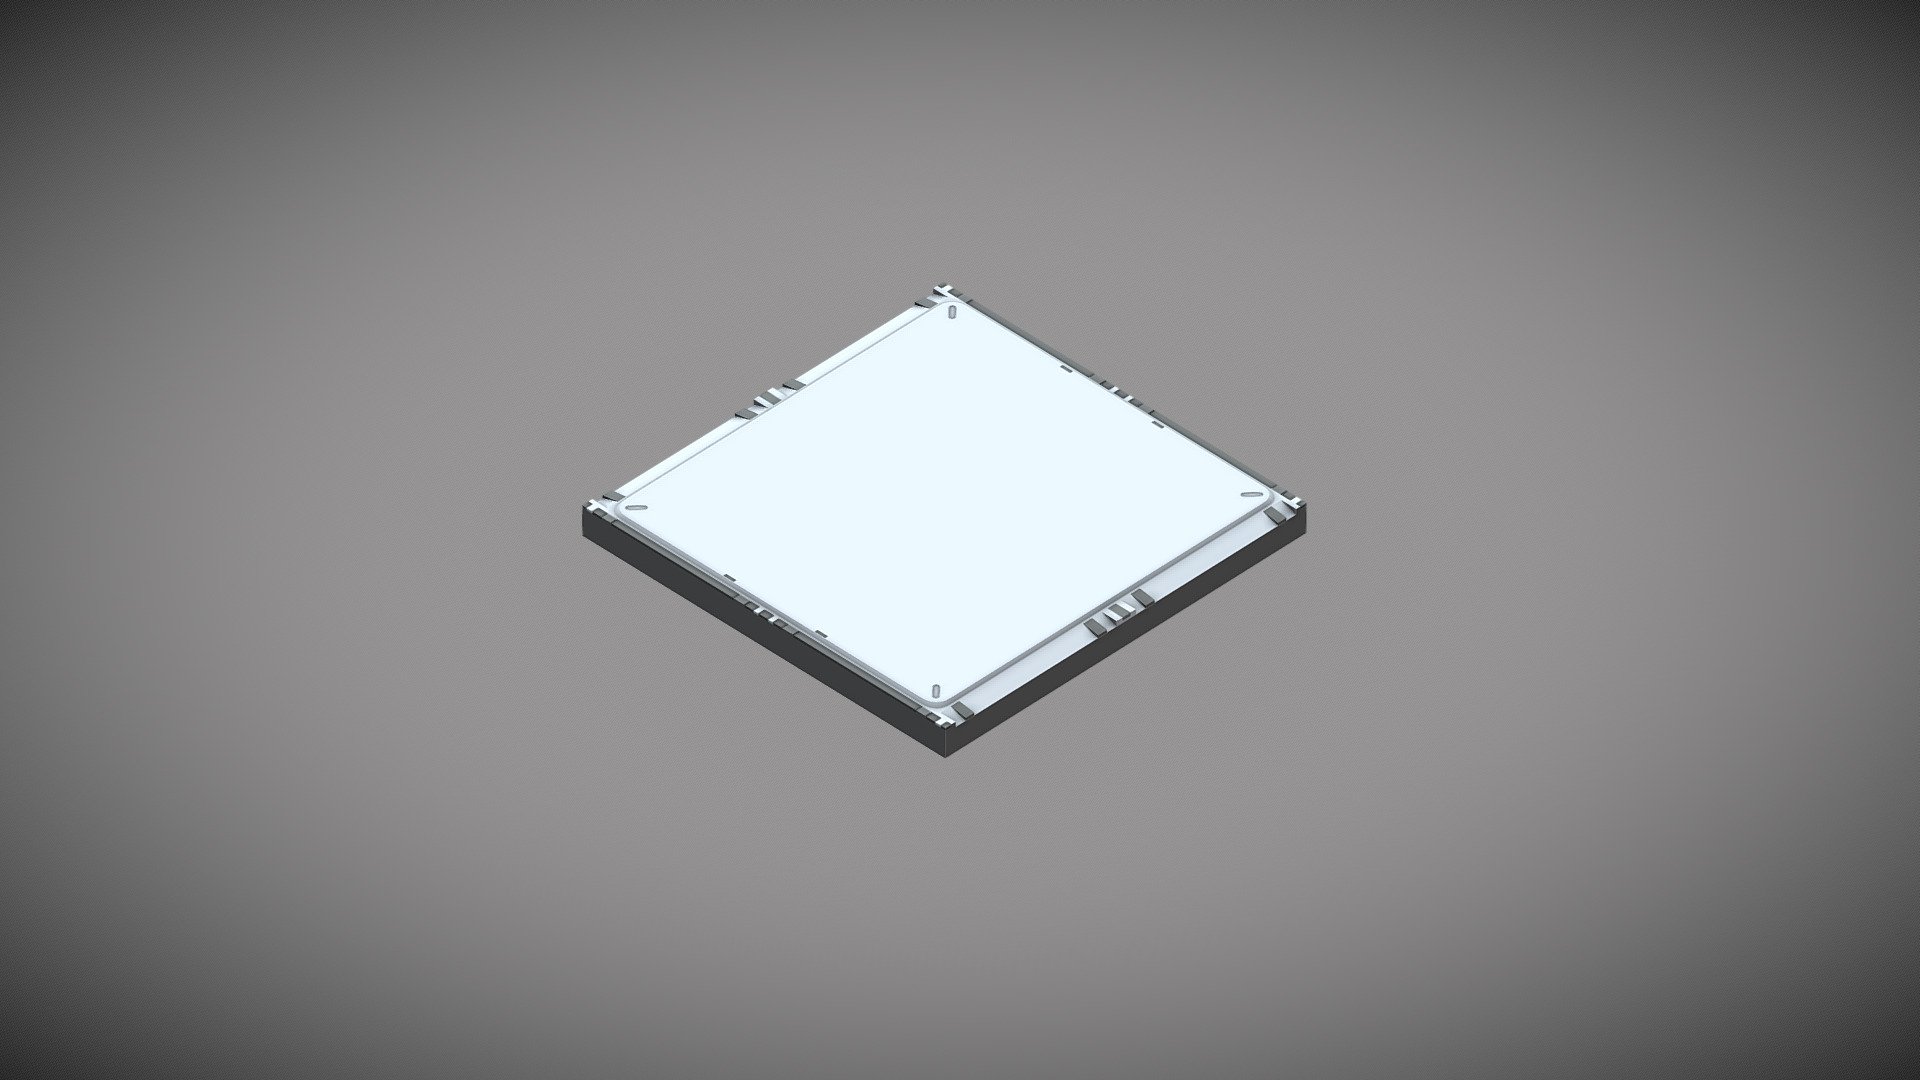 Sci-Fi Level Kit AAA: Floor Tile A
Textures: 2048x2048, diffuse, normal, specular.  

Part of the Sci-Fi Level Kit AAA. Available on Asset Store.

About Sci-Fi Level Kit AAA:

Complete kit of 43 interior items for sci-fi, lab or spaceship environment of AAA-quality. 

Gameready lowpolies baked with love from cinematic highpolies. Each model contain textures: 2048x2048, diffuse, normal, specular. Concept design by of the top AAA artists. Production cost over $10,000. Make your own level design on Unity competitive to Deus Ex: Human Revolution, Deus Ex: Mankind Divided, Syndicate 2012, Mass Effect and Star Citizen benchmarks! 

Preview for each of the items attached via Sketchfab (rotate, zoom, enjoy). 

（╹◡╹） - Sci-Fi Level Kit AAA: Floor Tile A - Buy Royalty Free 3D model by blackcloudstudios 3d model